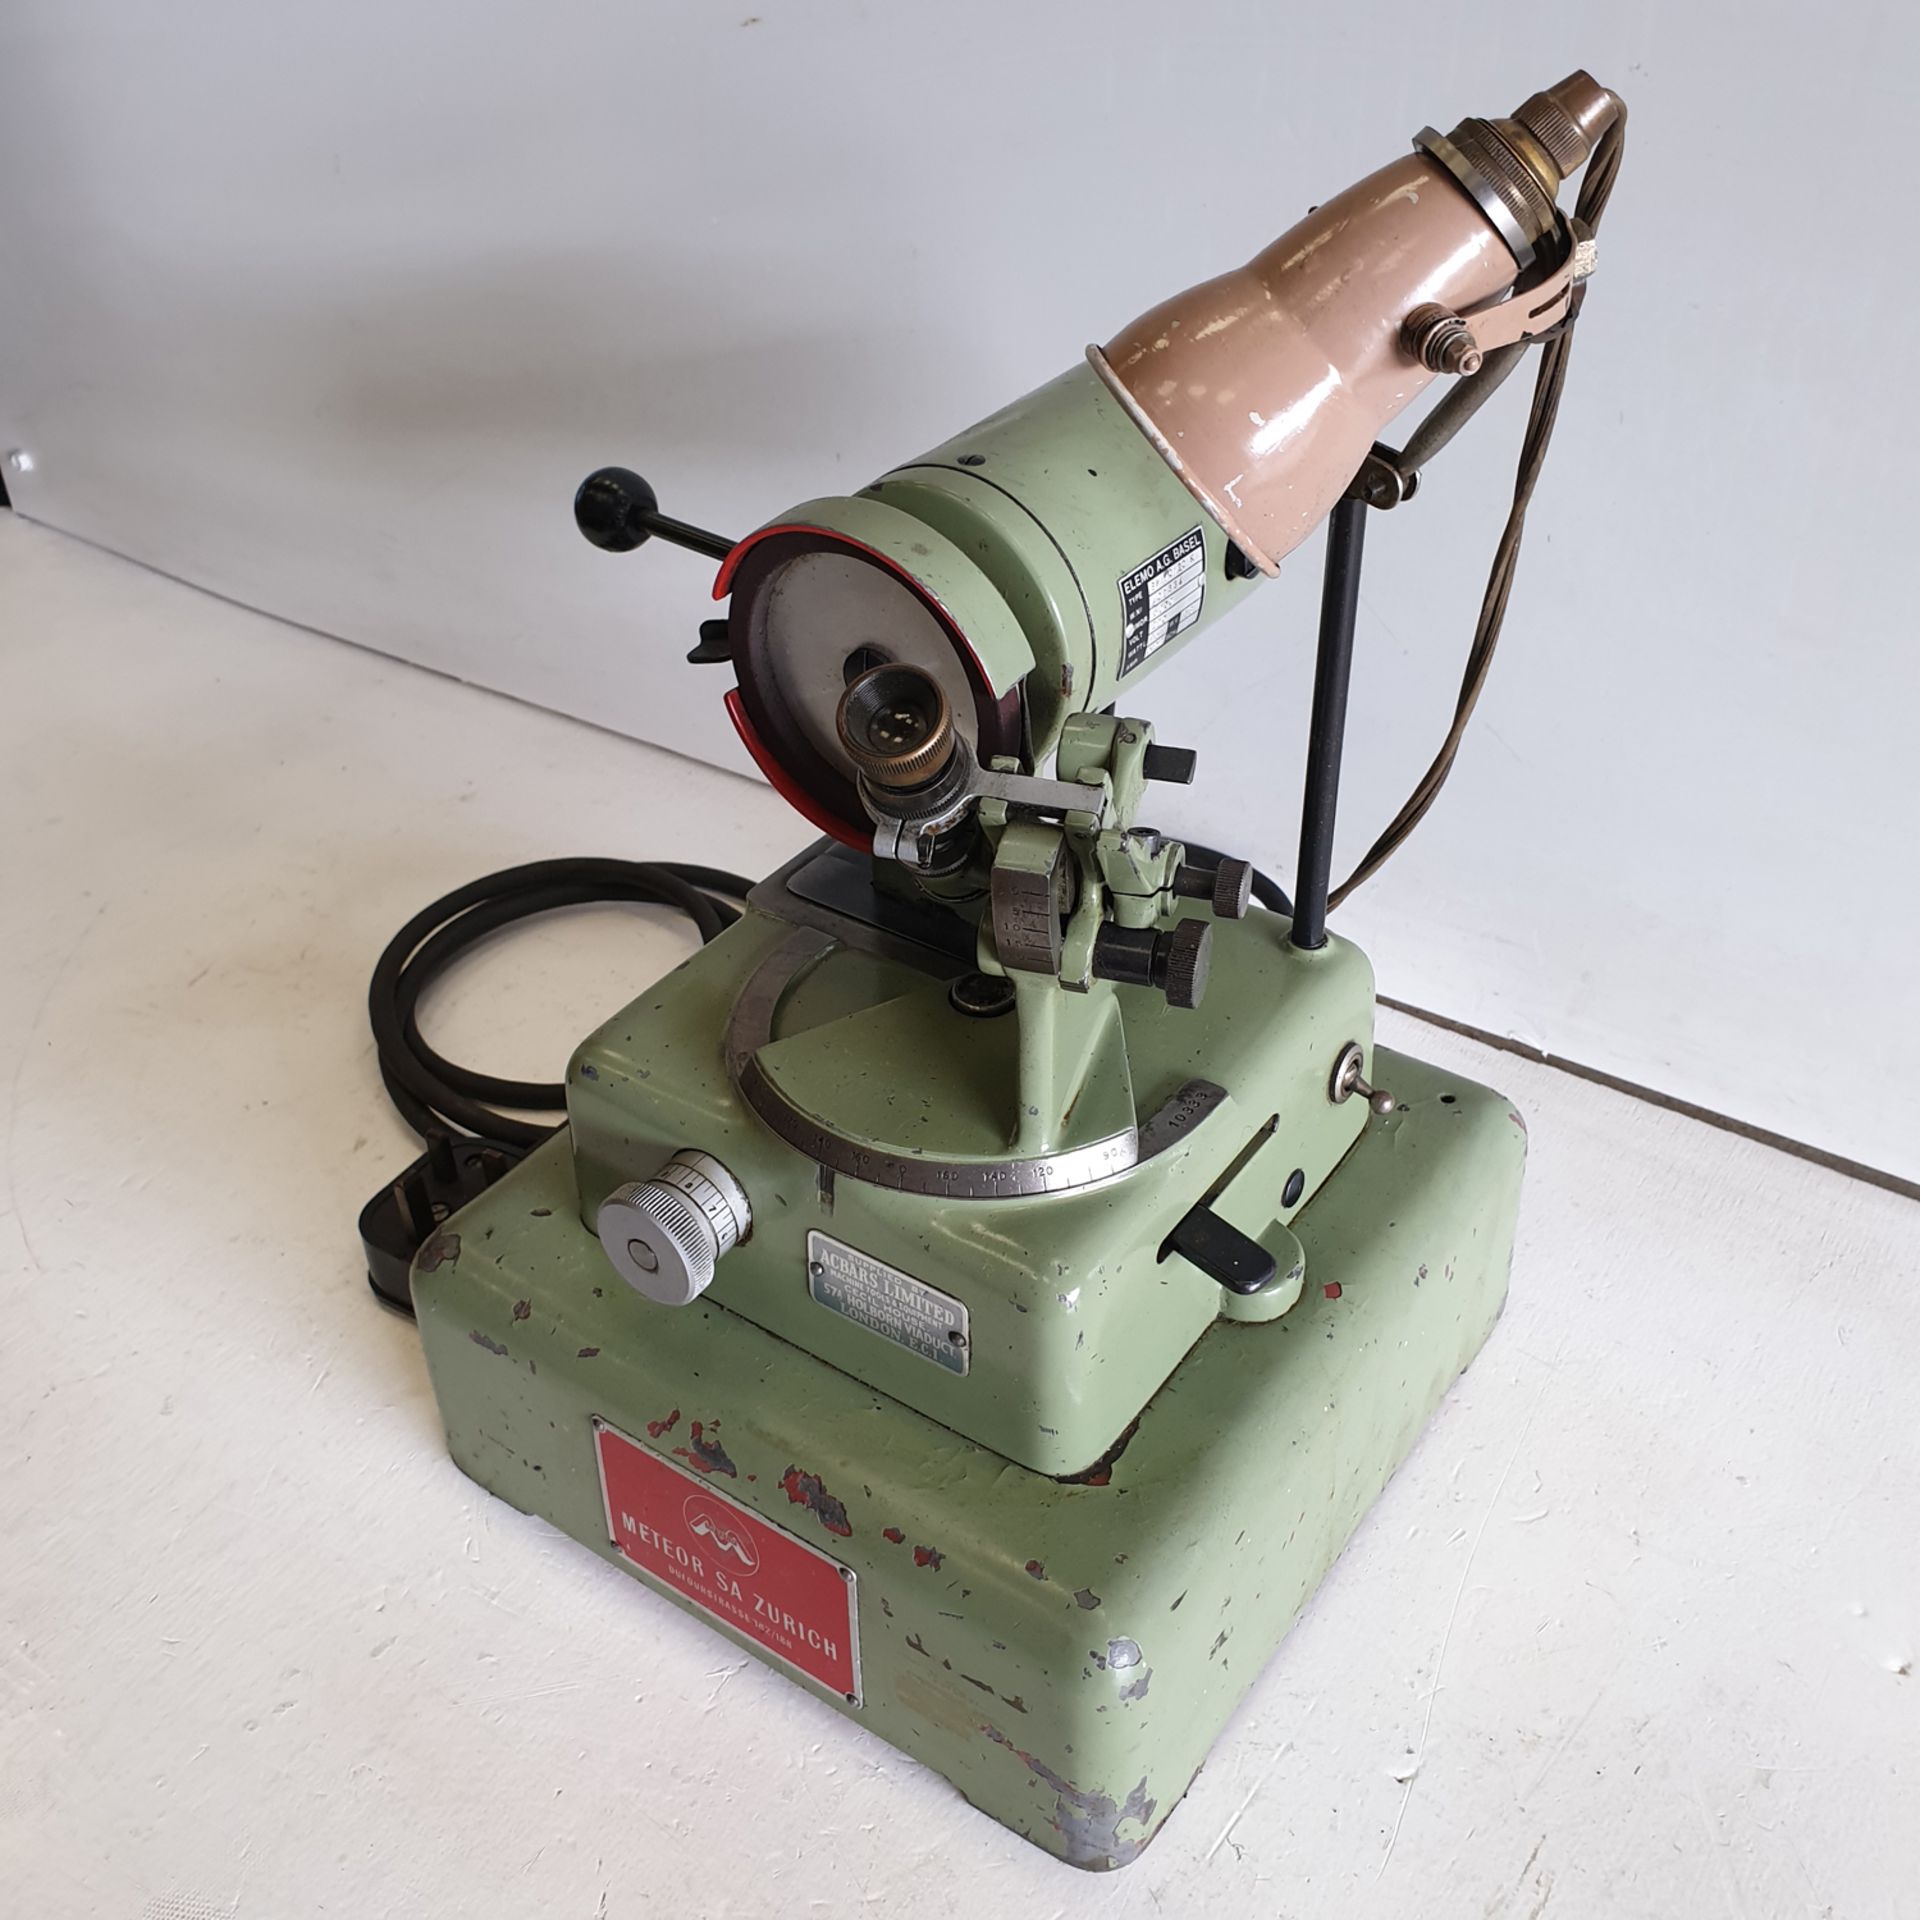 Meteor Sa Zurich. Bench Top Drill Grinder. 220V 15W. With Light. - Image 2 of 11